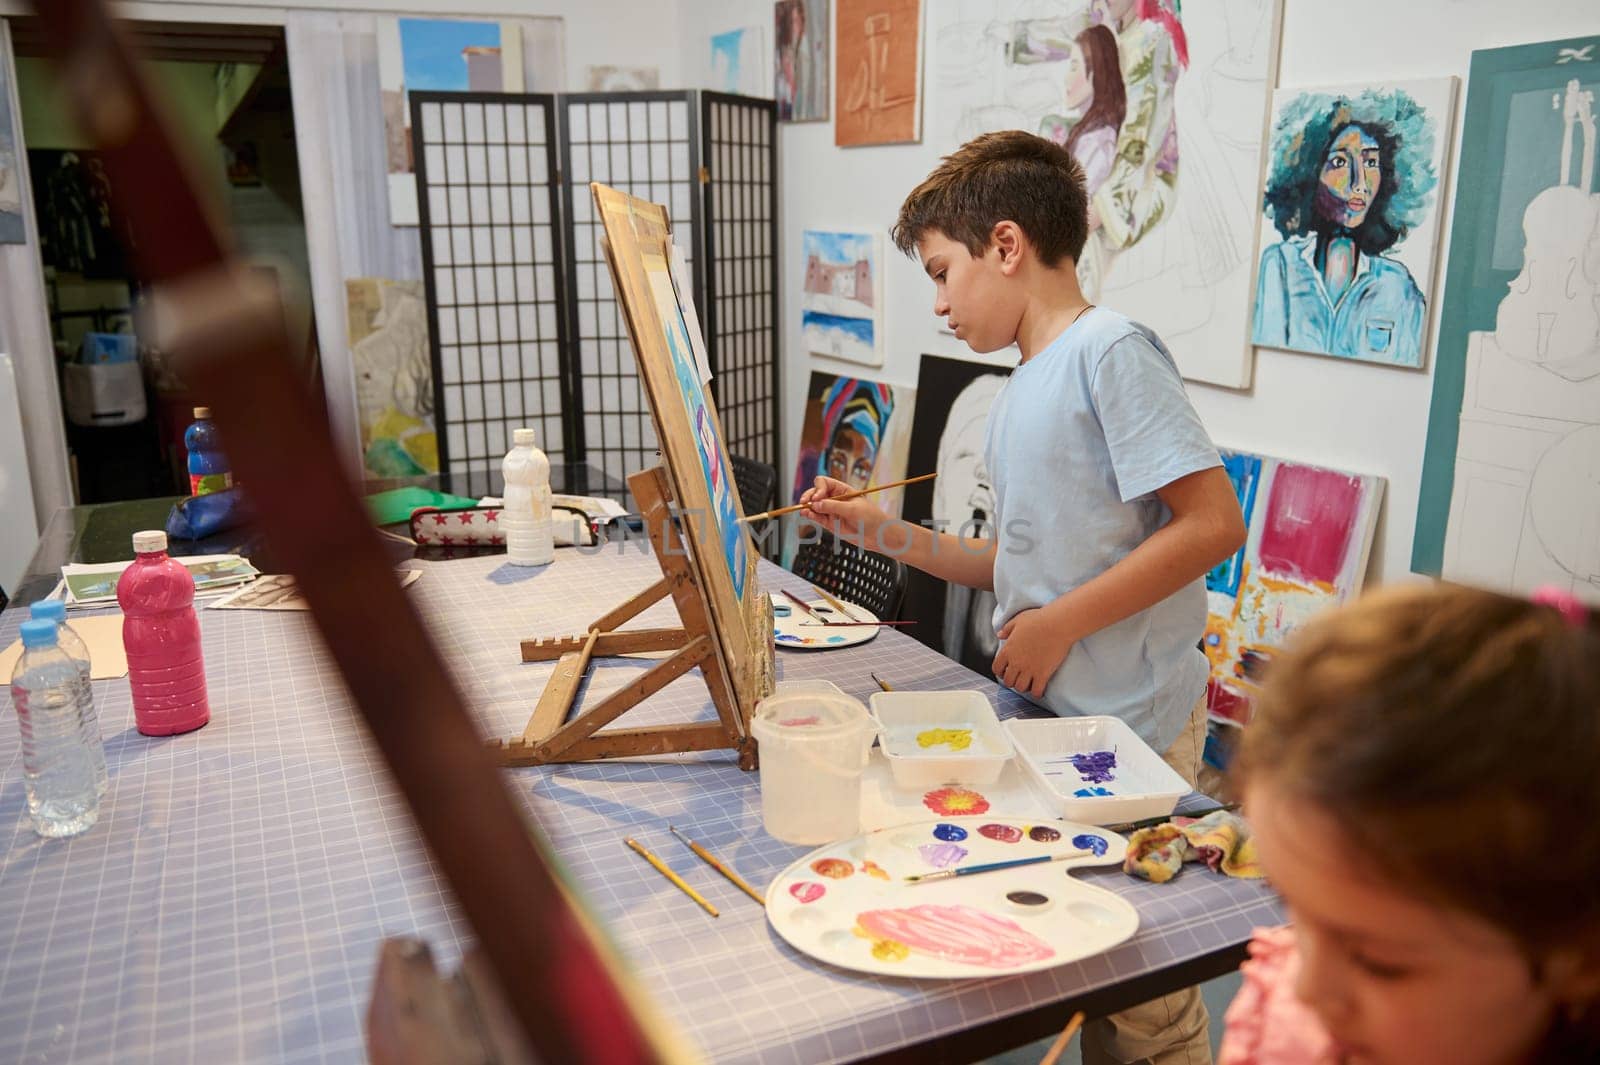 Confident focused boy and girl, artists painters standing by wooden easel and learning art in a cozy creative workshop by artgf